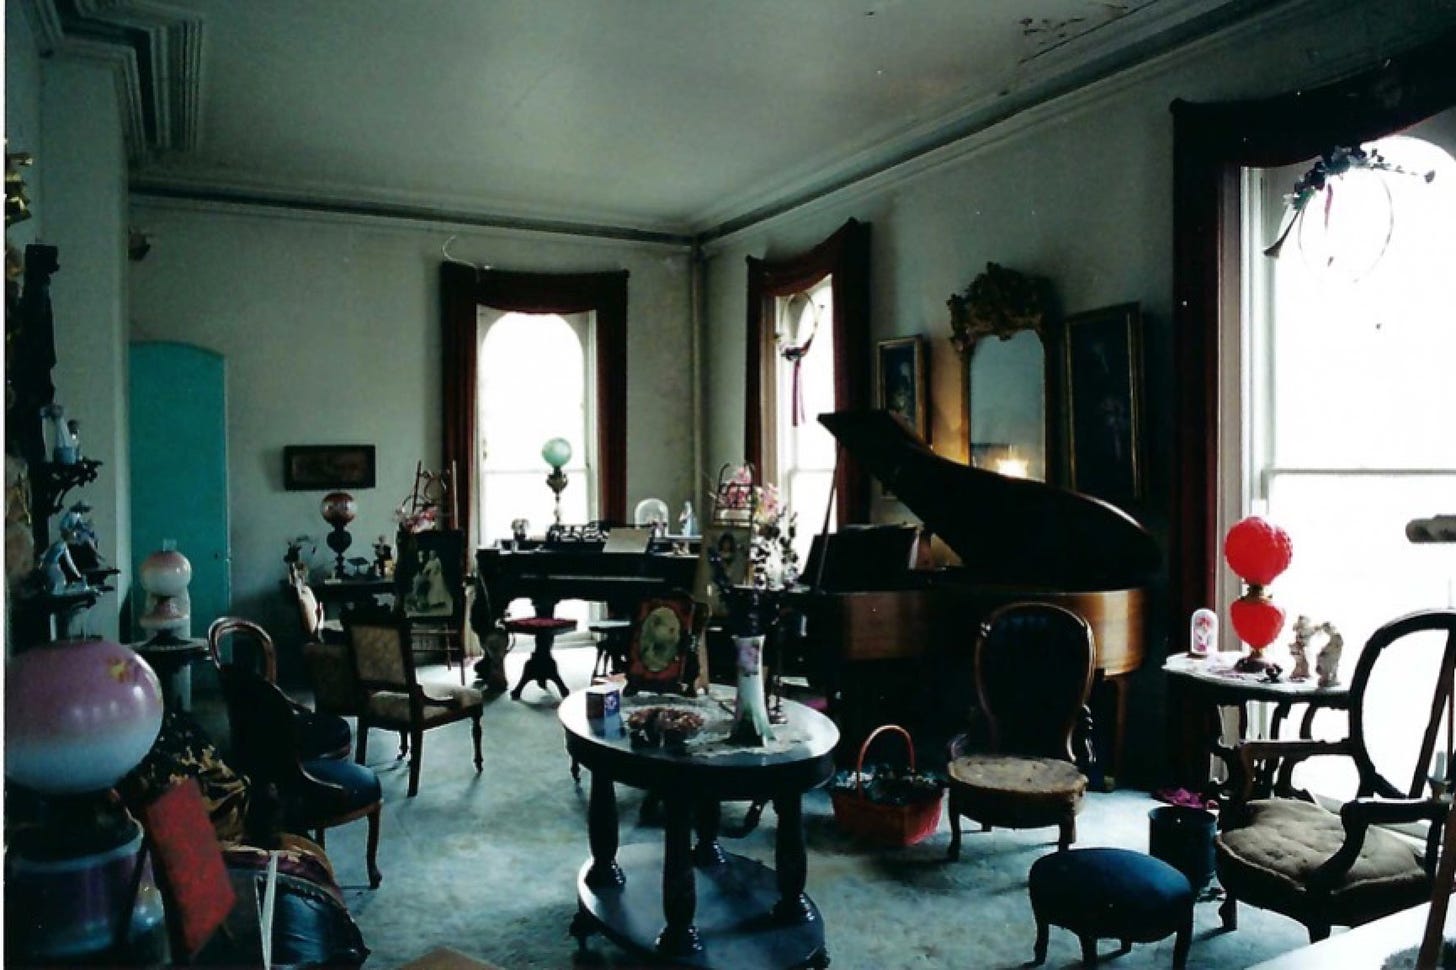 Photo of parlor in Victorian house with antique chairs, lamps, tables, and other tchotchkes